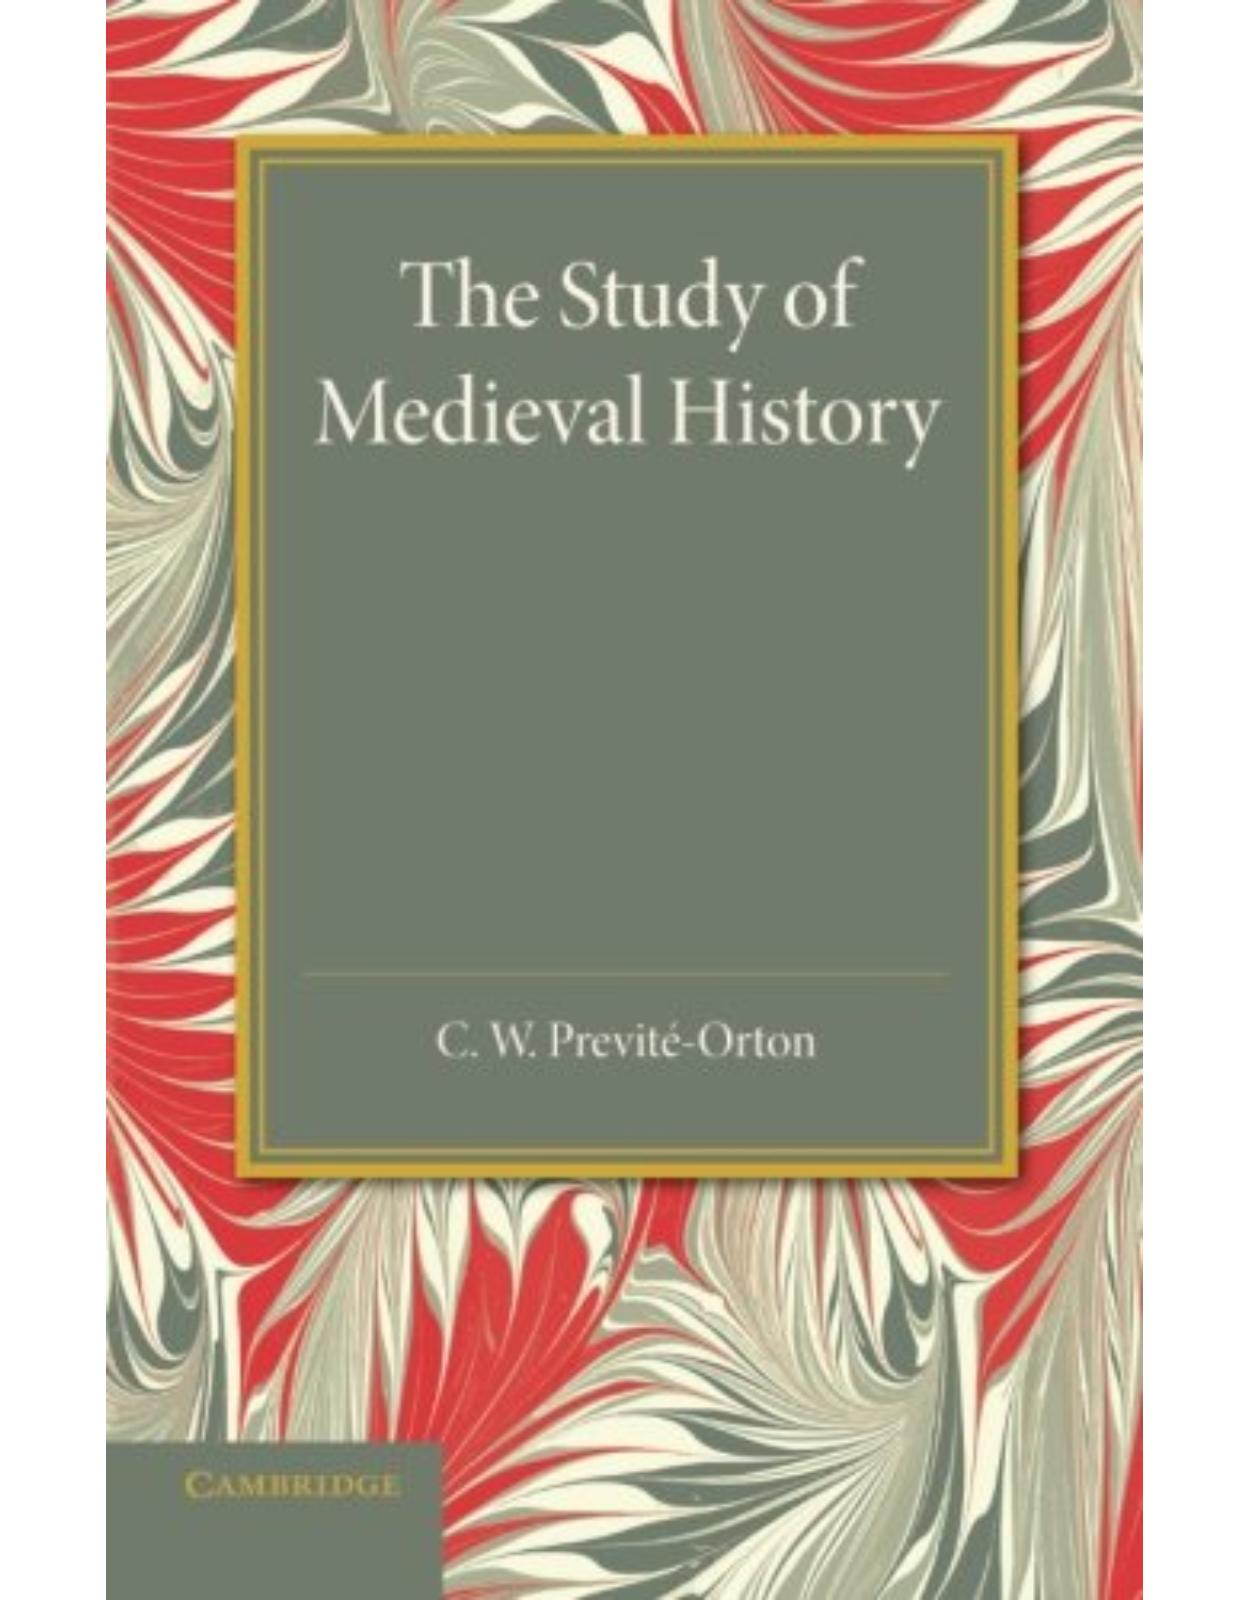 The Study of Medieval History: An Inaugural Lecture